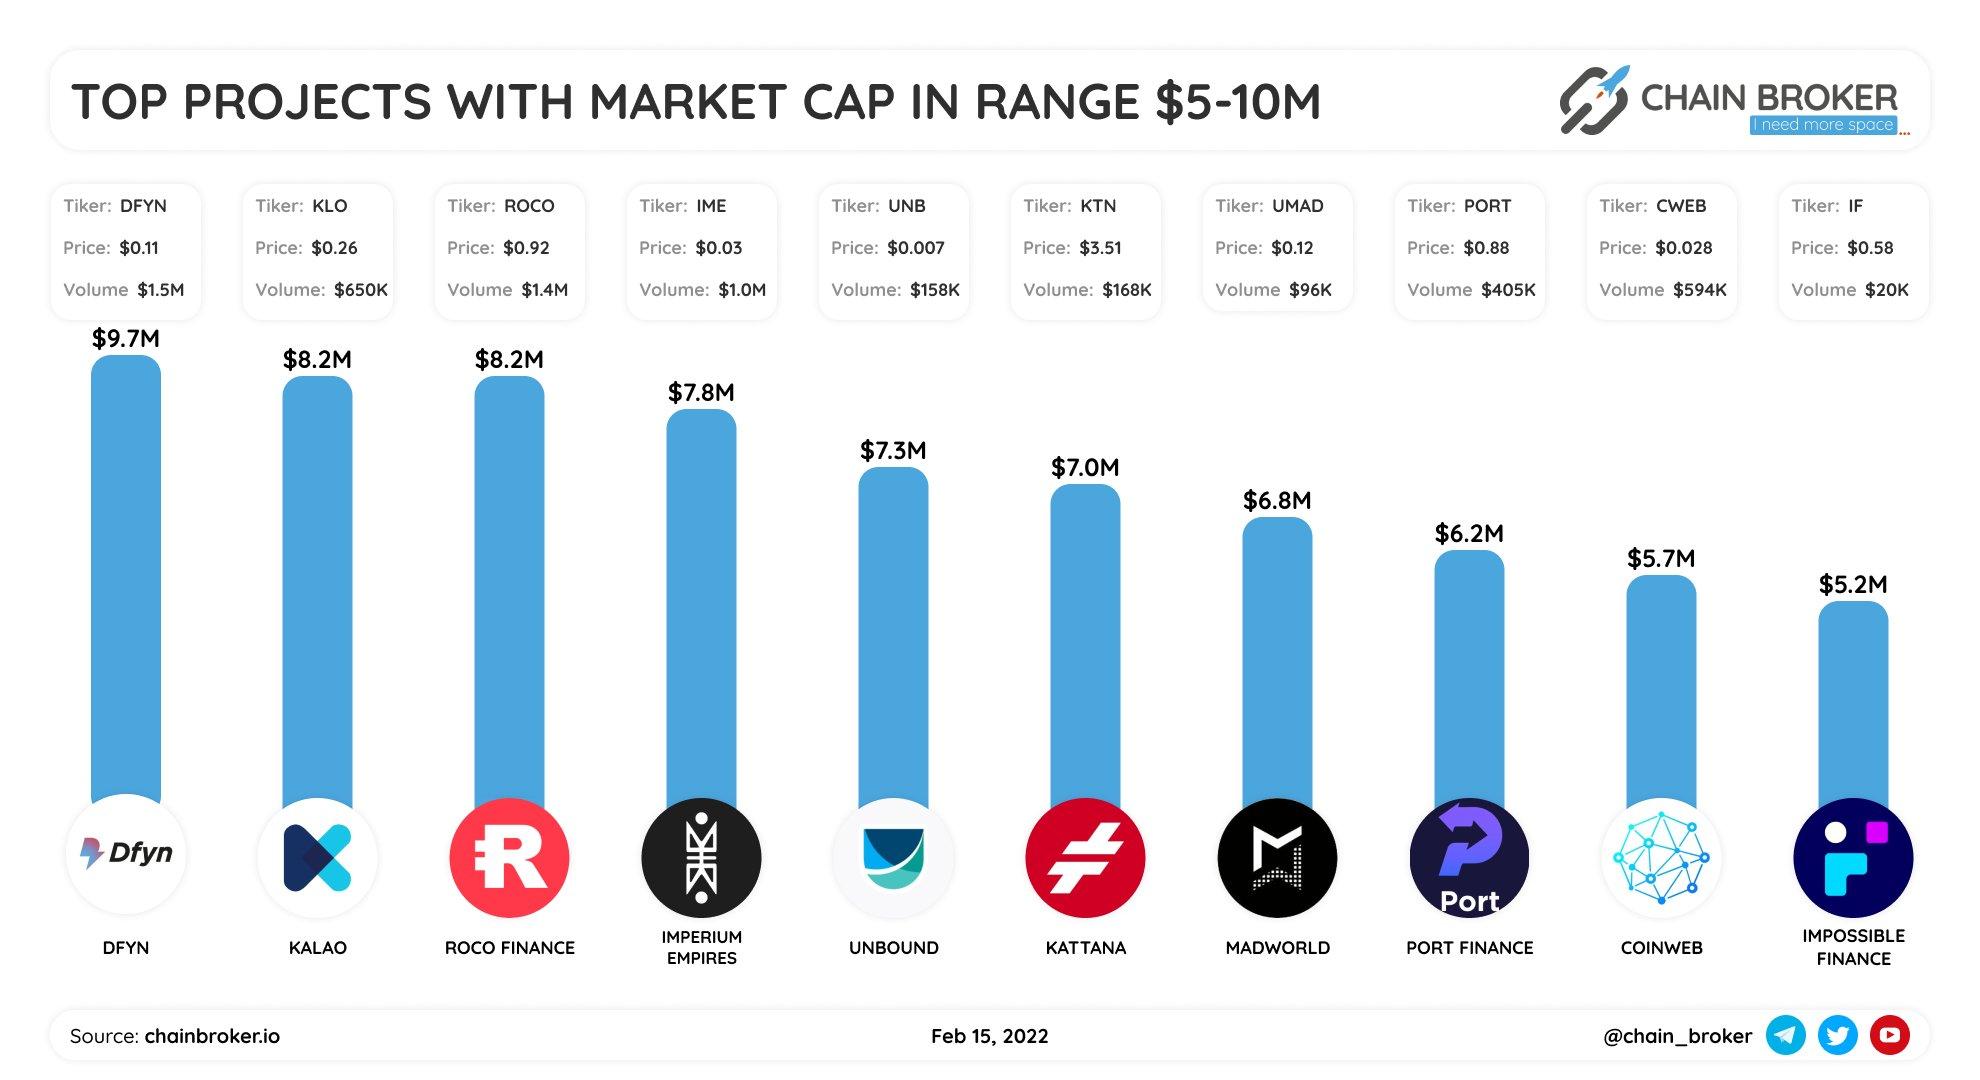 Top projects with market cap $5M-$10M